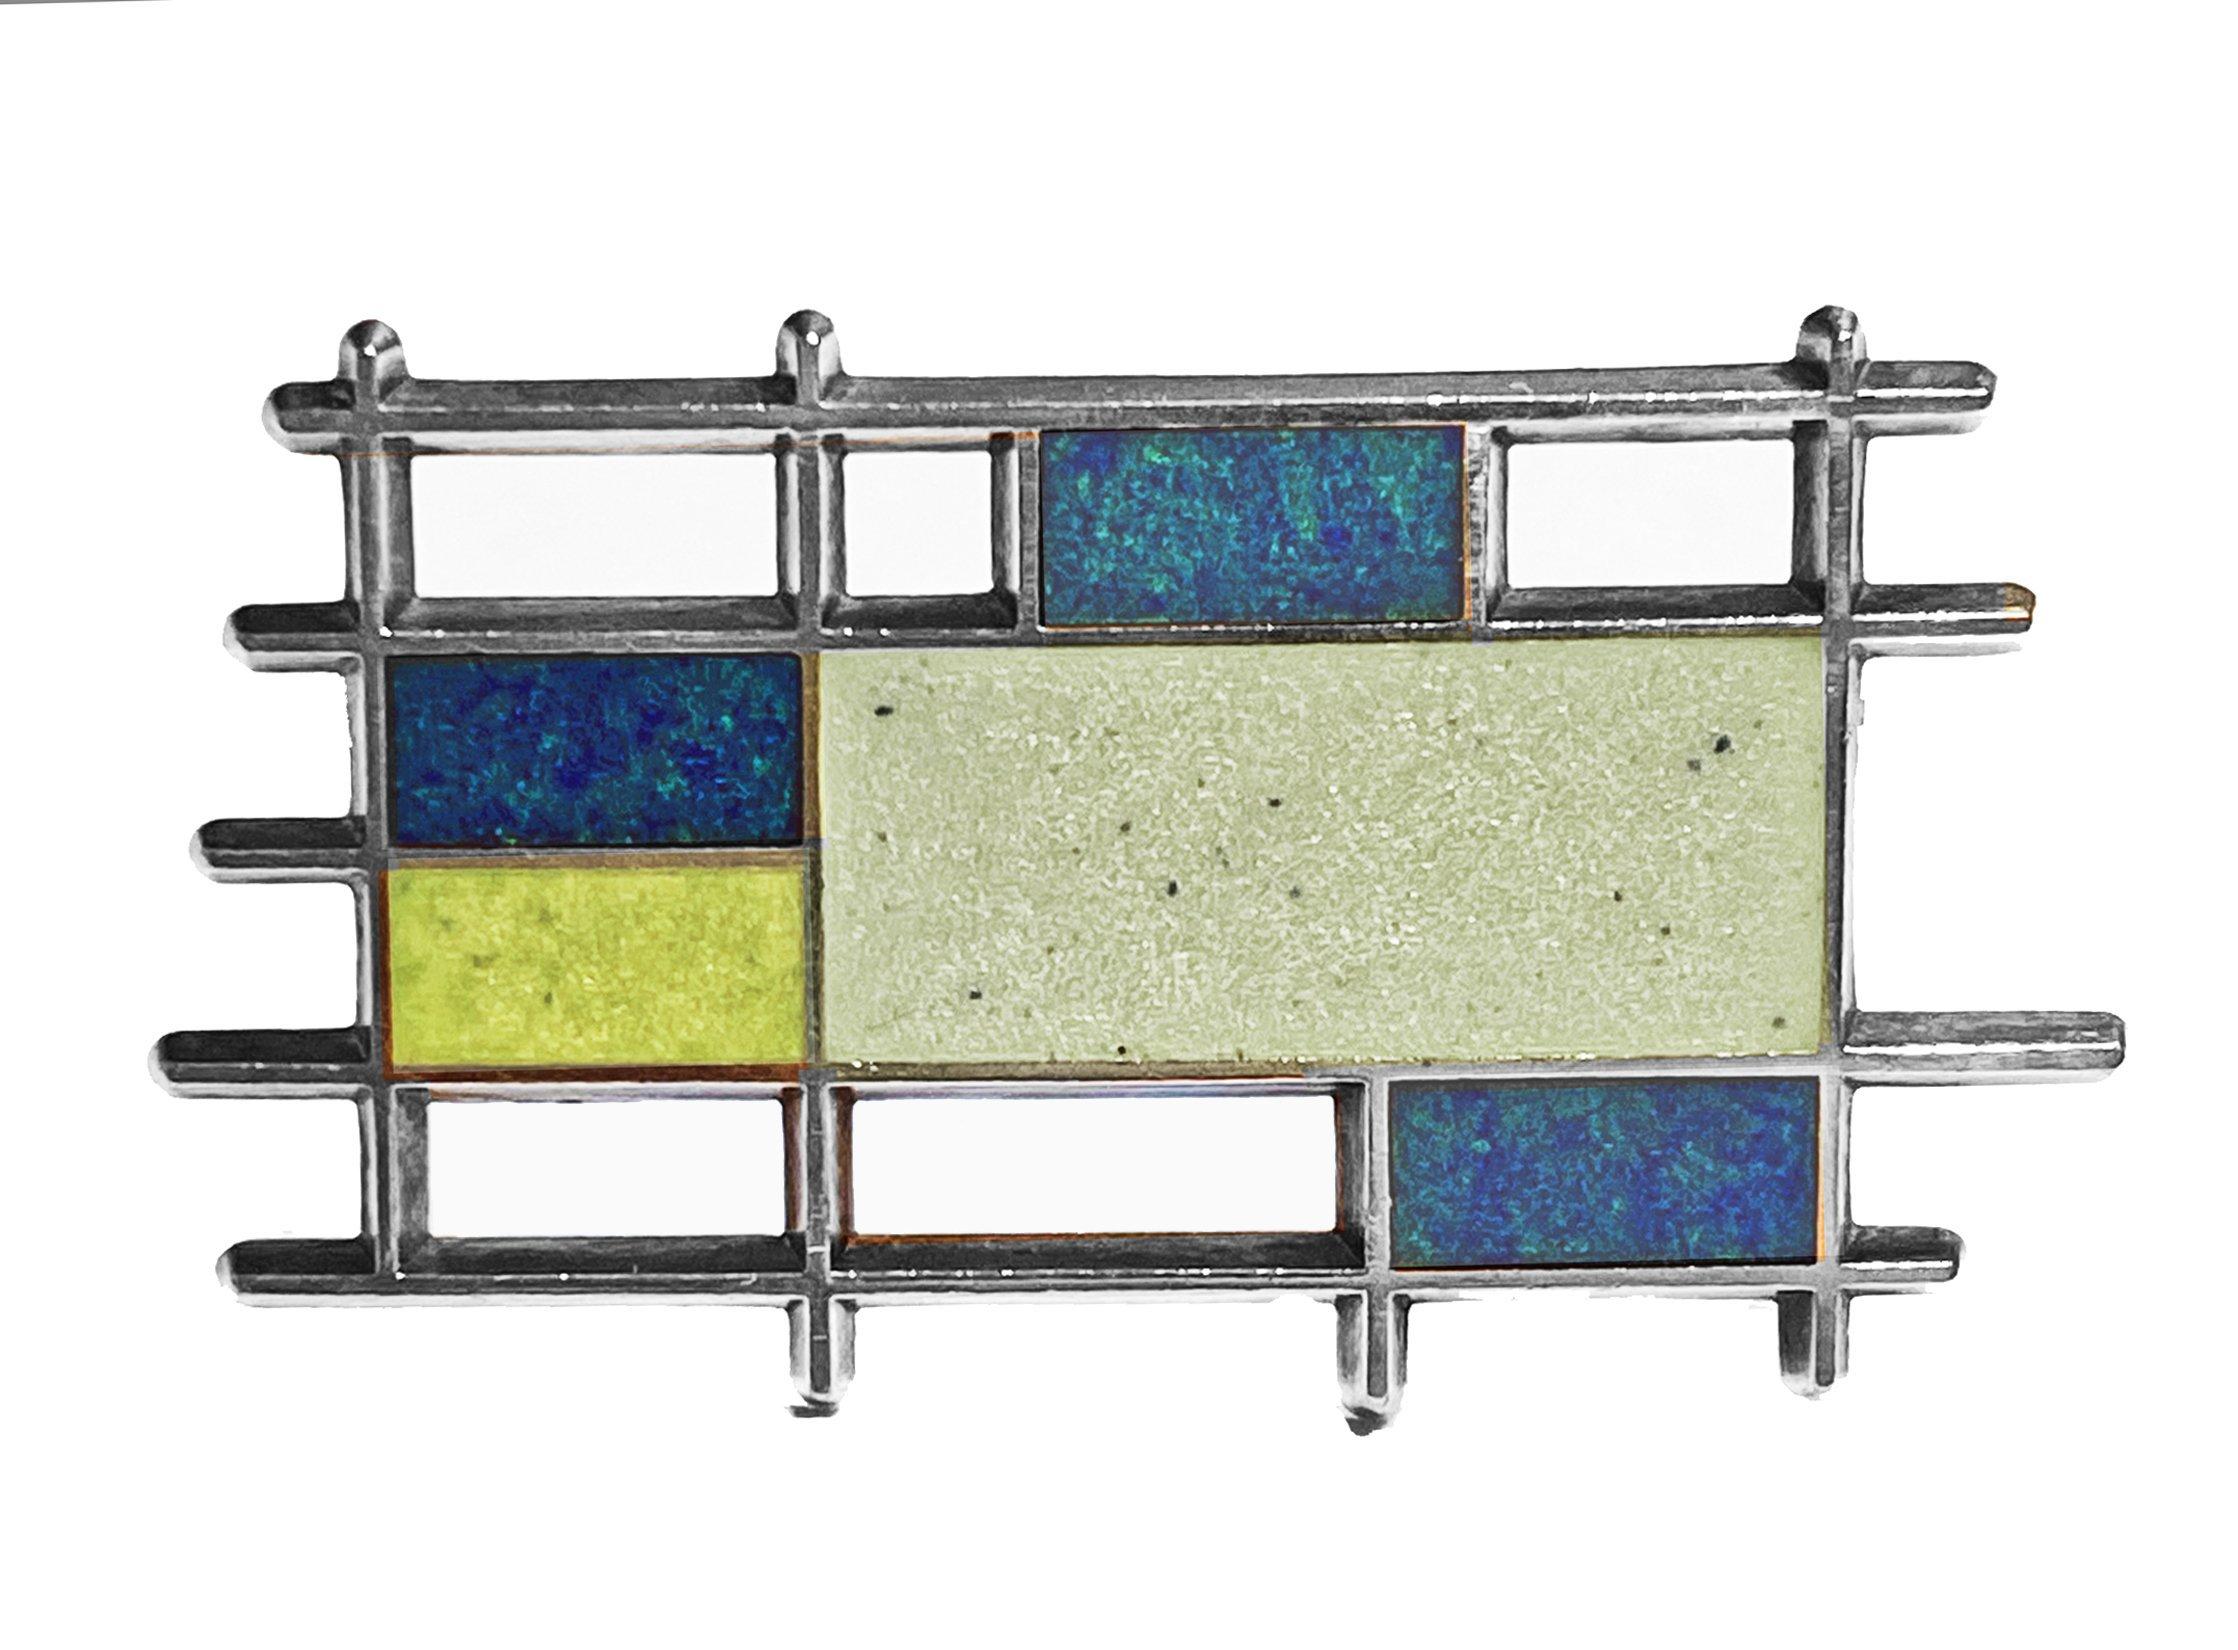 Rare Georg Jensen sterling silver enamel abstract brooch, Denmark, C.1960. This piece was designed by Bente Bonne (1929-1996) for Georg Jensen. Whilst primarily a glass designer and engraver she was also known for enamel designs for Georg Jensen.